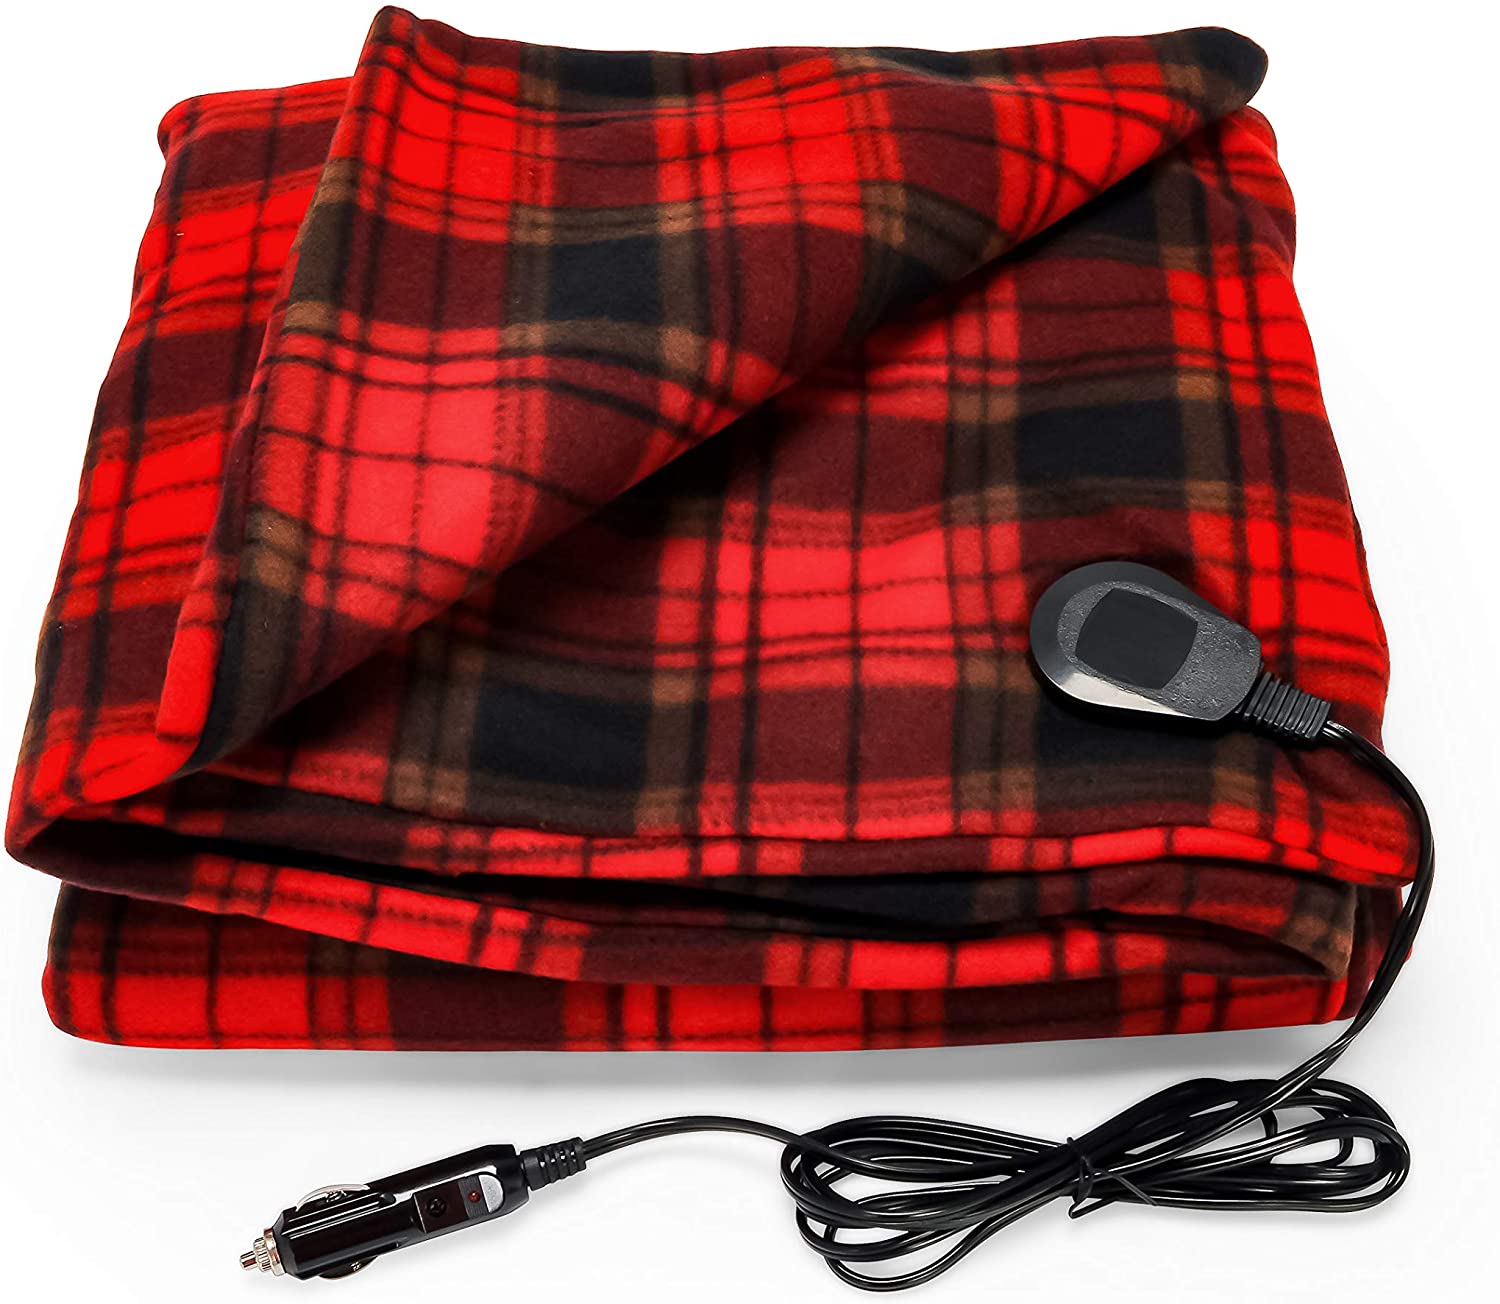 -Blue Grid HUIQ® 12v Car Electric Blanket Winter Hot Fleece 145x100cm Car Heating Blanket with Timed and Temperature Control Flannel Fleece Warm Keeping Heated Blanket